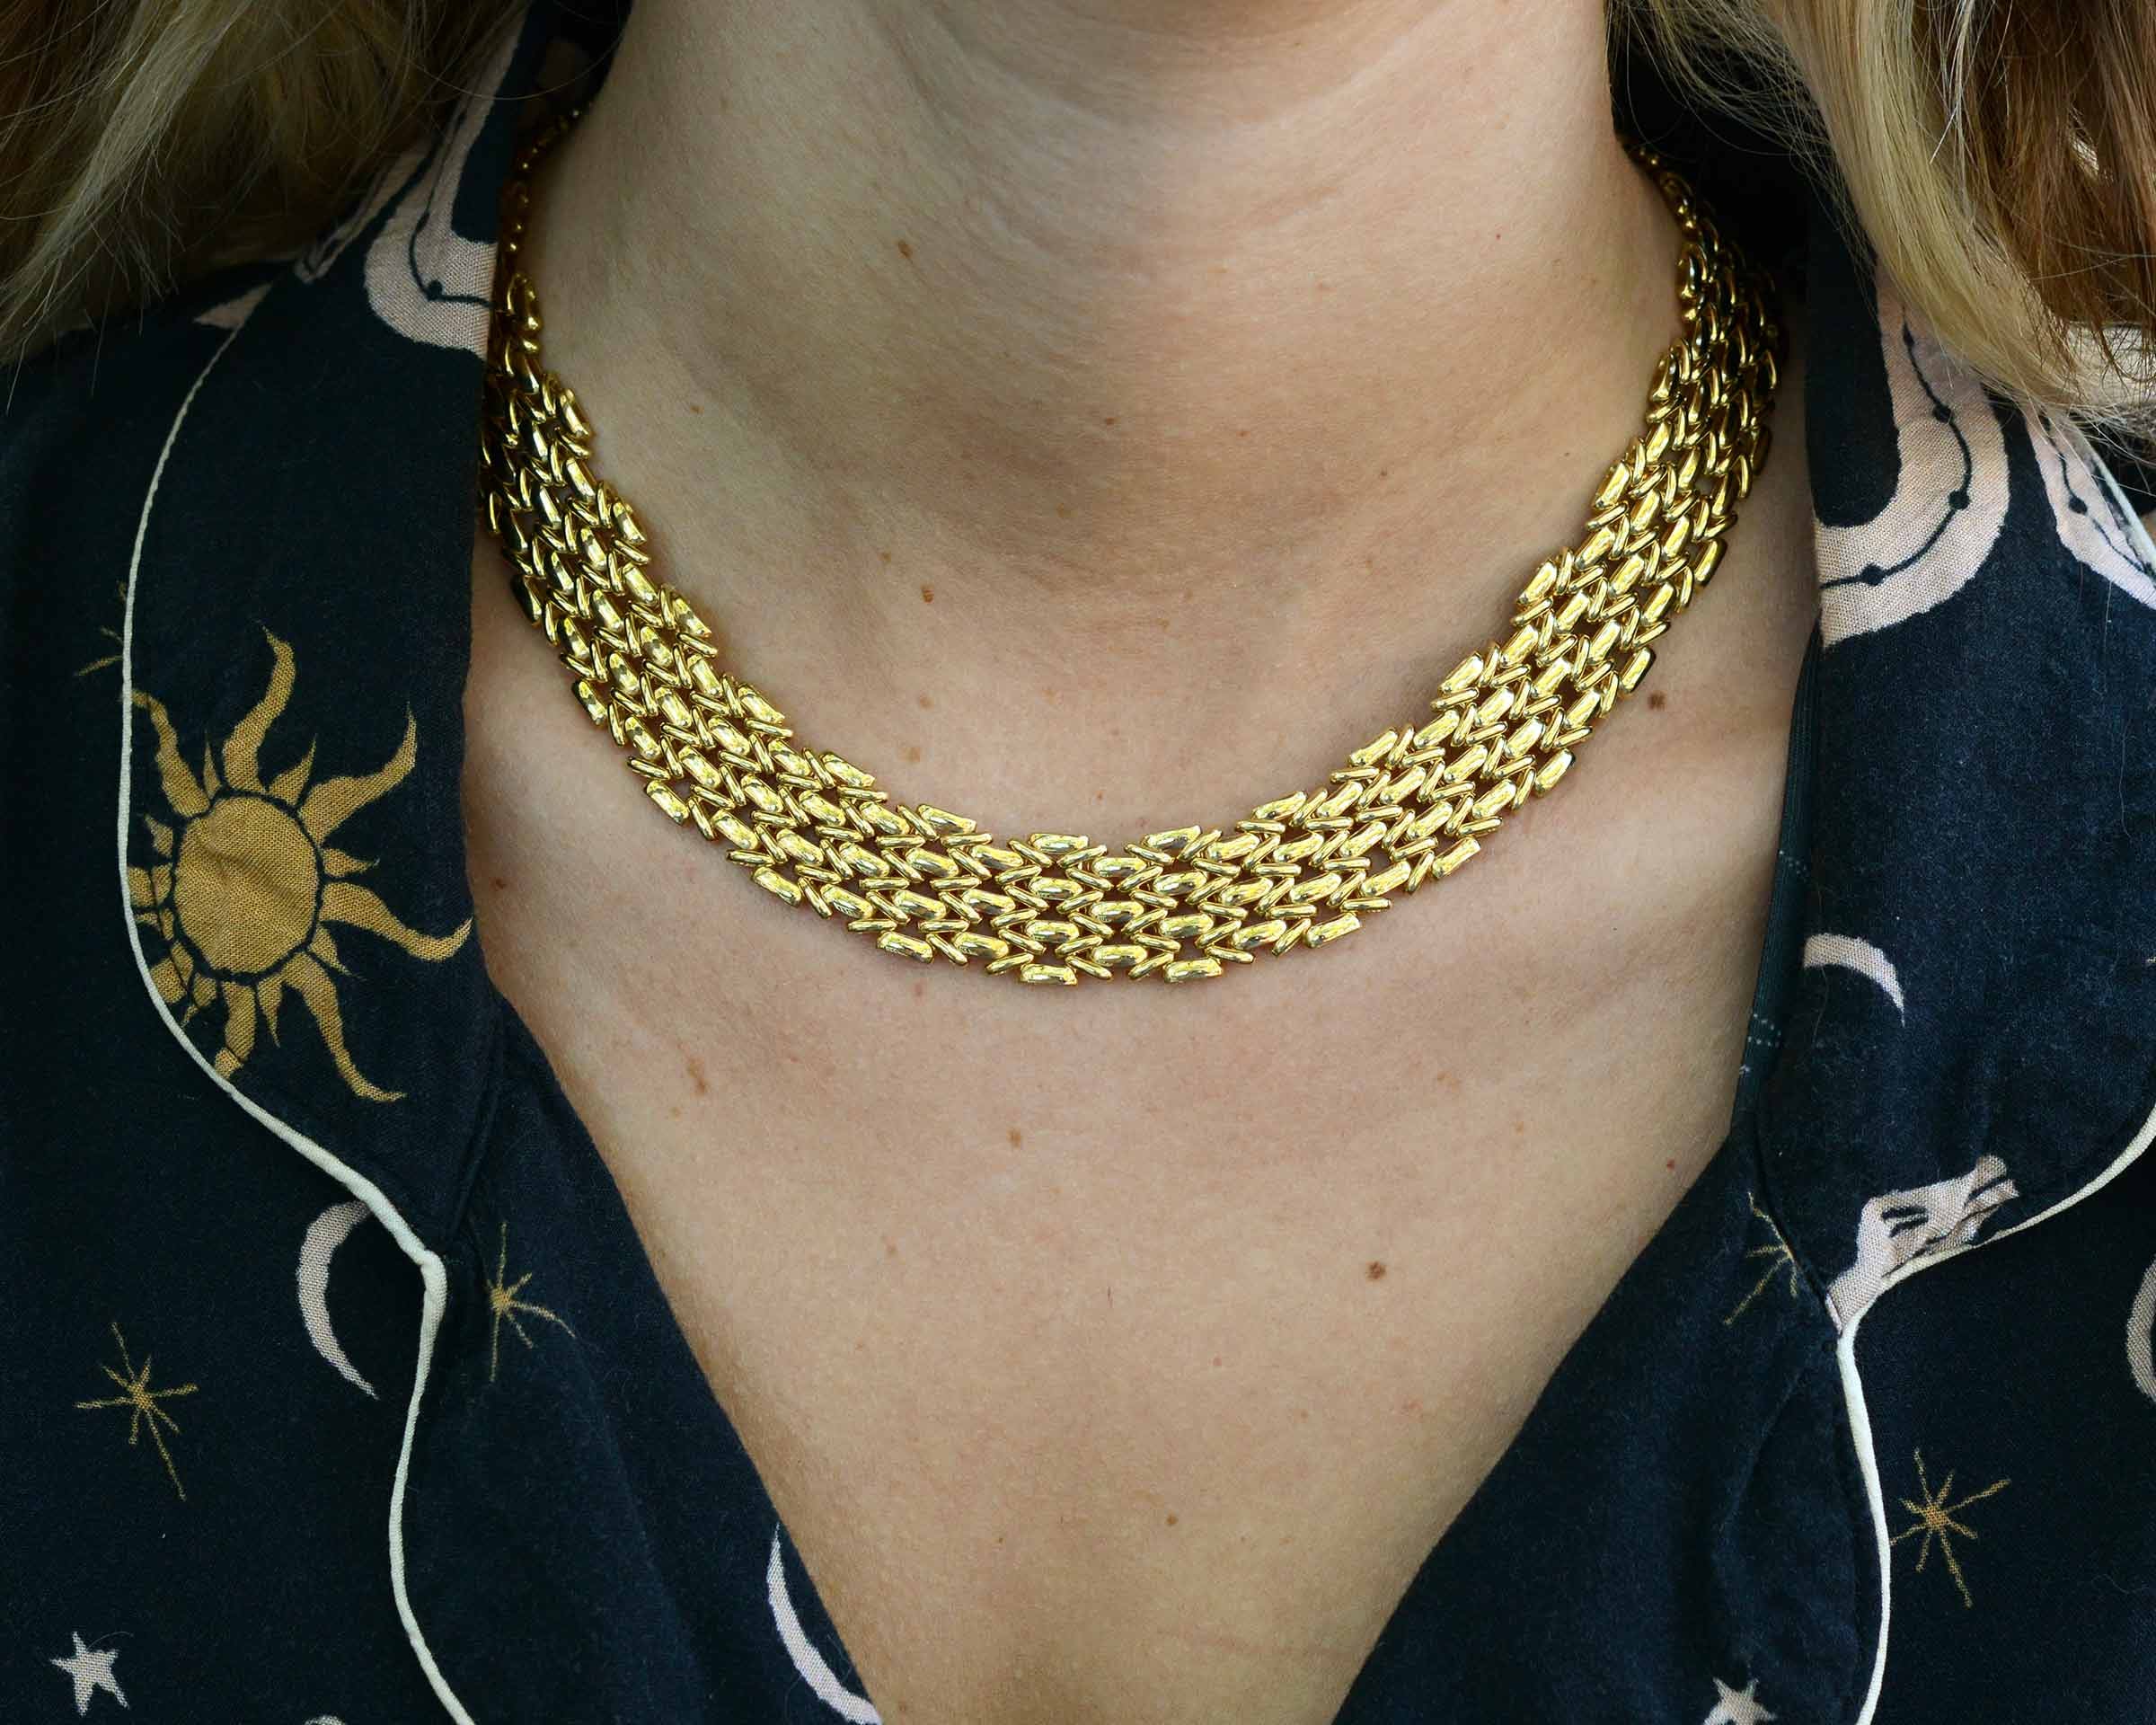 Cartier Panther Style Wide 18K Gold Choker Necklace